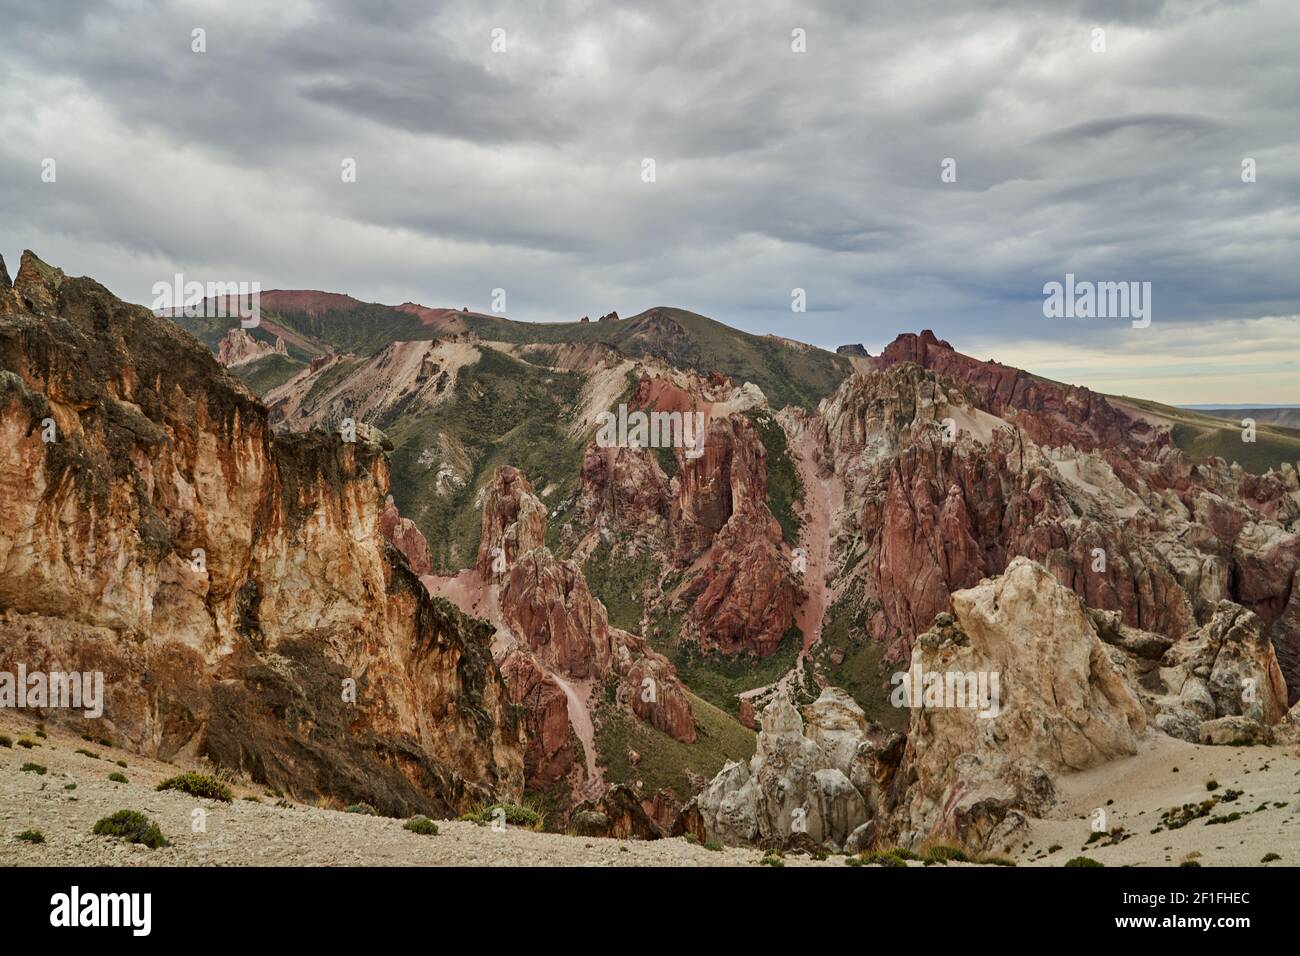 Landscape of Andean Mountains at Rio Jeinemeni close to Cile Chico at Lago General Carrera. Moon Valley, Patagonia, Argentina, South America Stock Photo